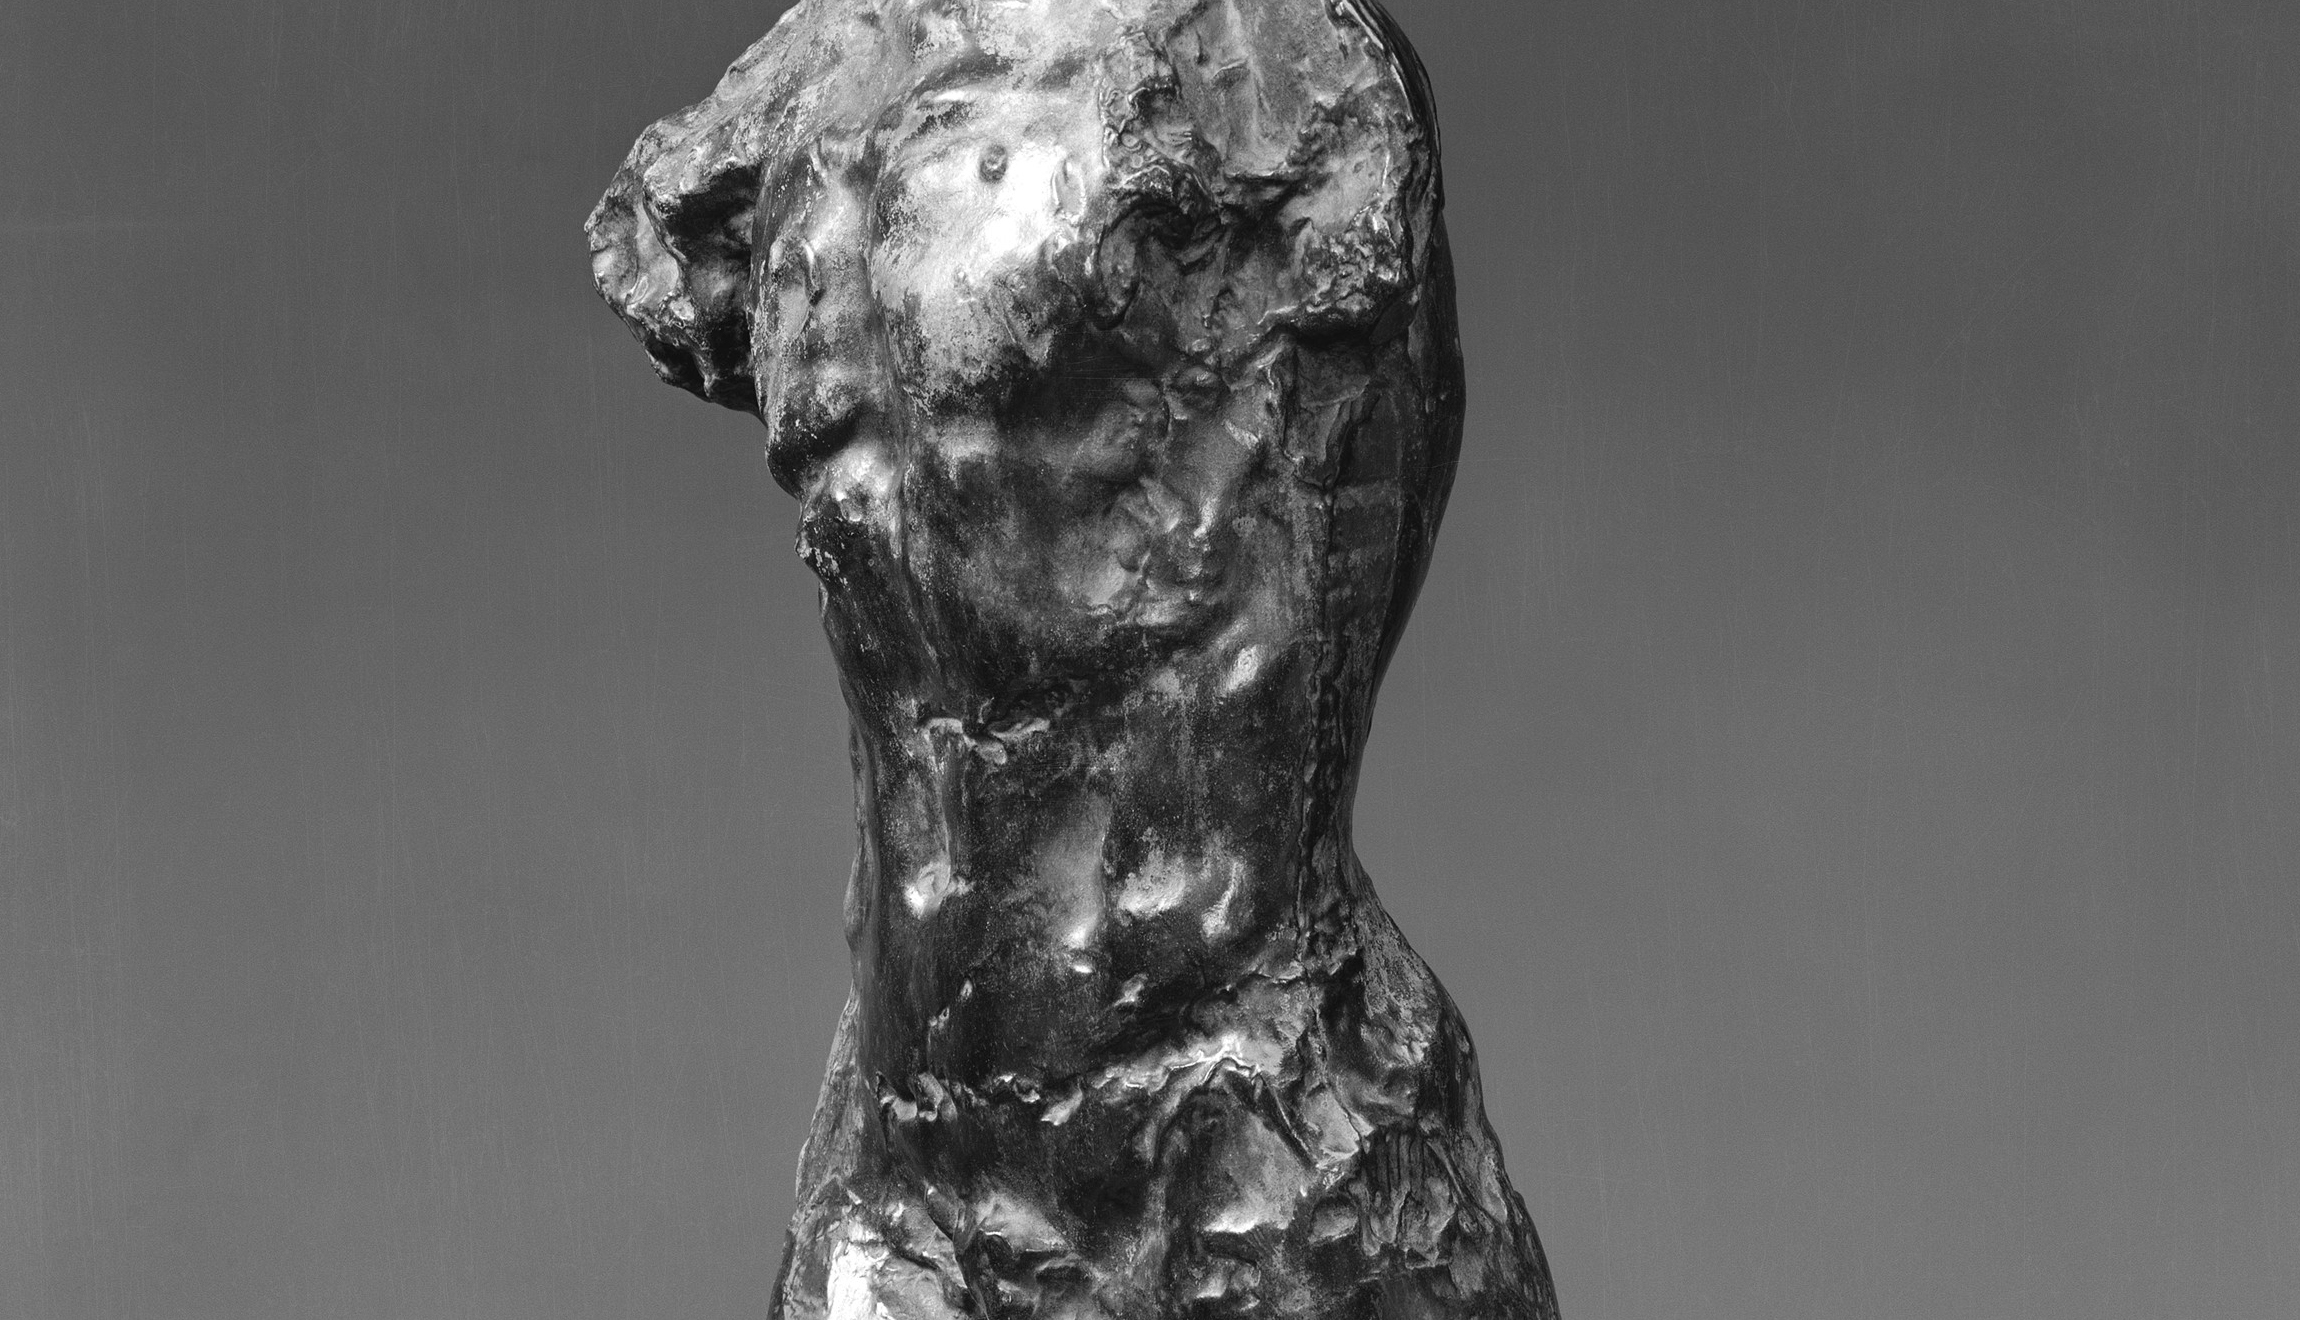 Auguste Rodin, The Walking Man (detail), before 1900 (cast by Alexis Rudier before 1914), bronze with green patina, 85.1 cm high (The Metropolitan Museum of Art)